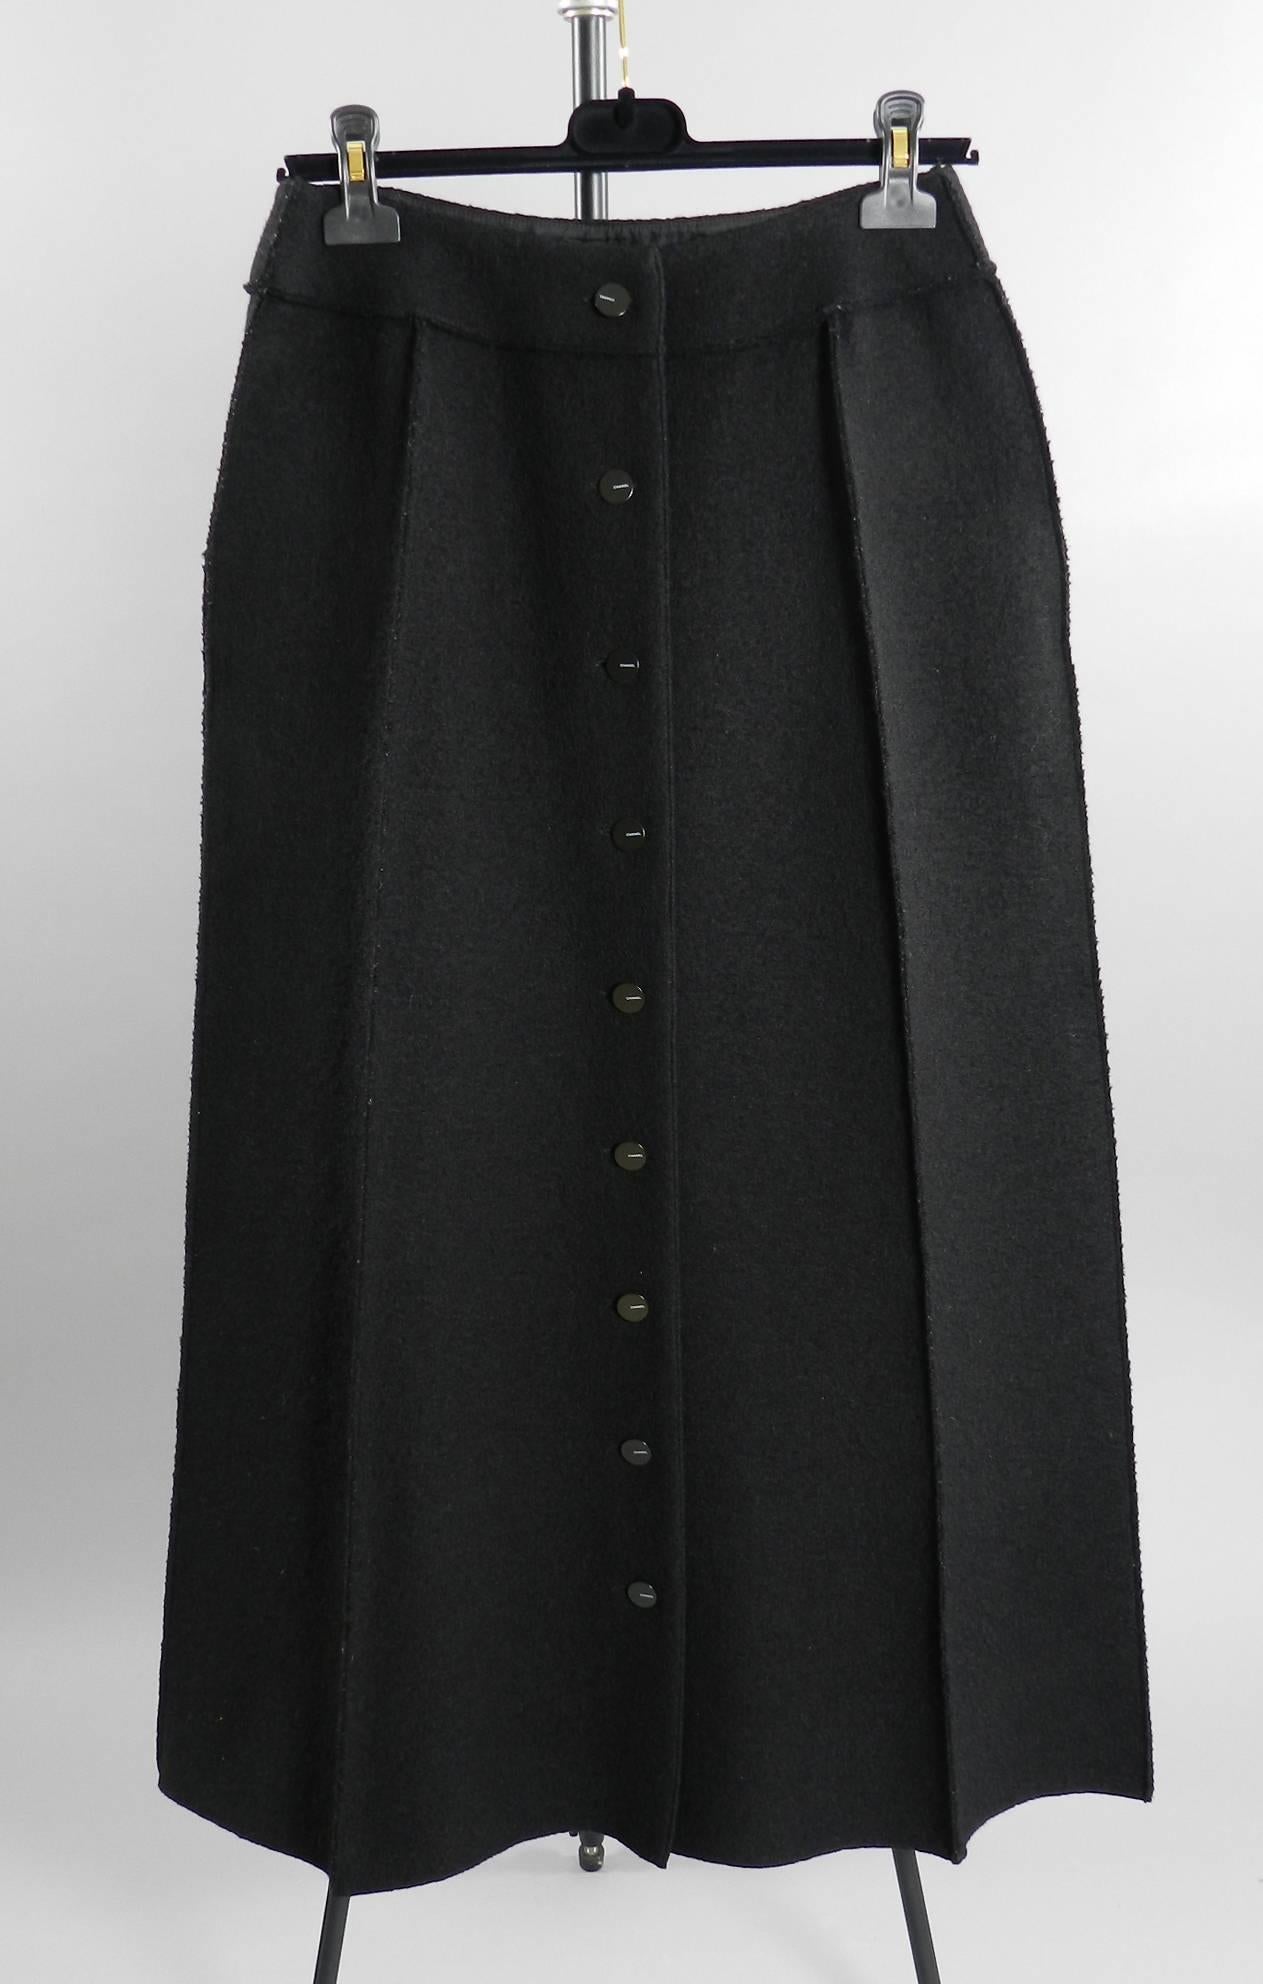 Chanel 1999 fall / winter collection long black skirt. Boiled wool with silk lining and Chanel buttons down back. Excellent pre-owned / vintage condition. Tagged size FR 40 (USA 8). To fit 28